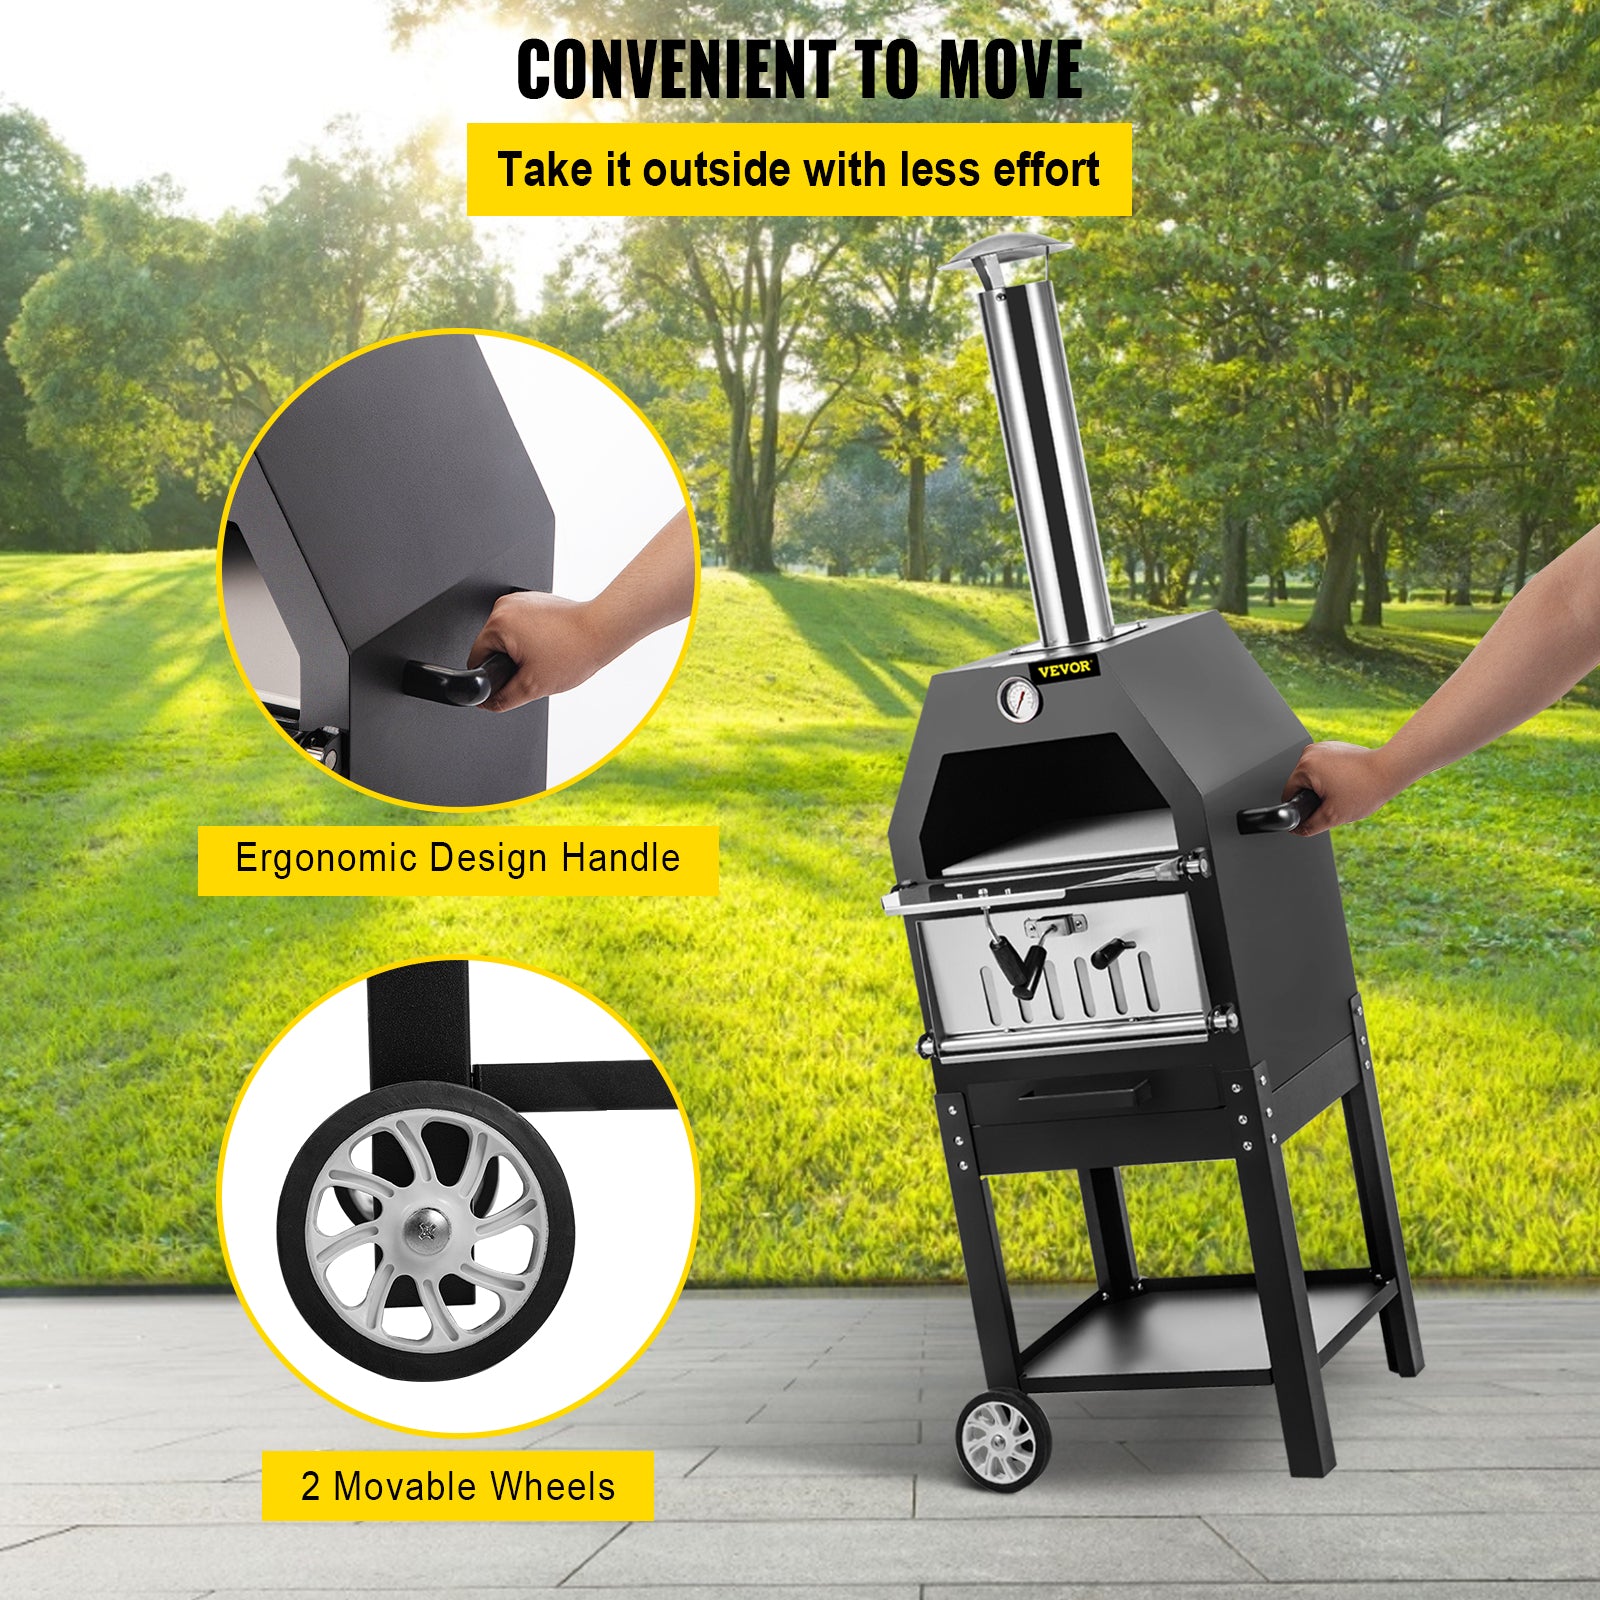 Wood-Fired Pizza Oven, Portable, Time-Saving